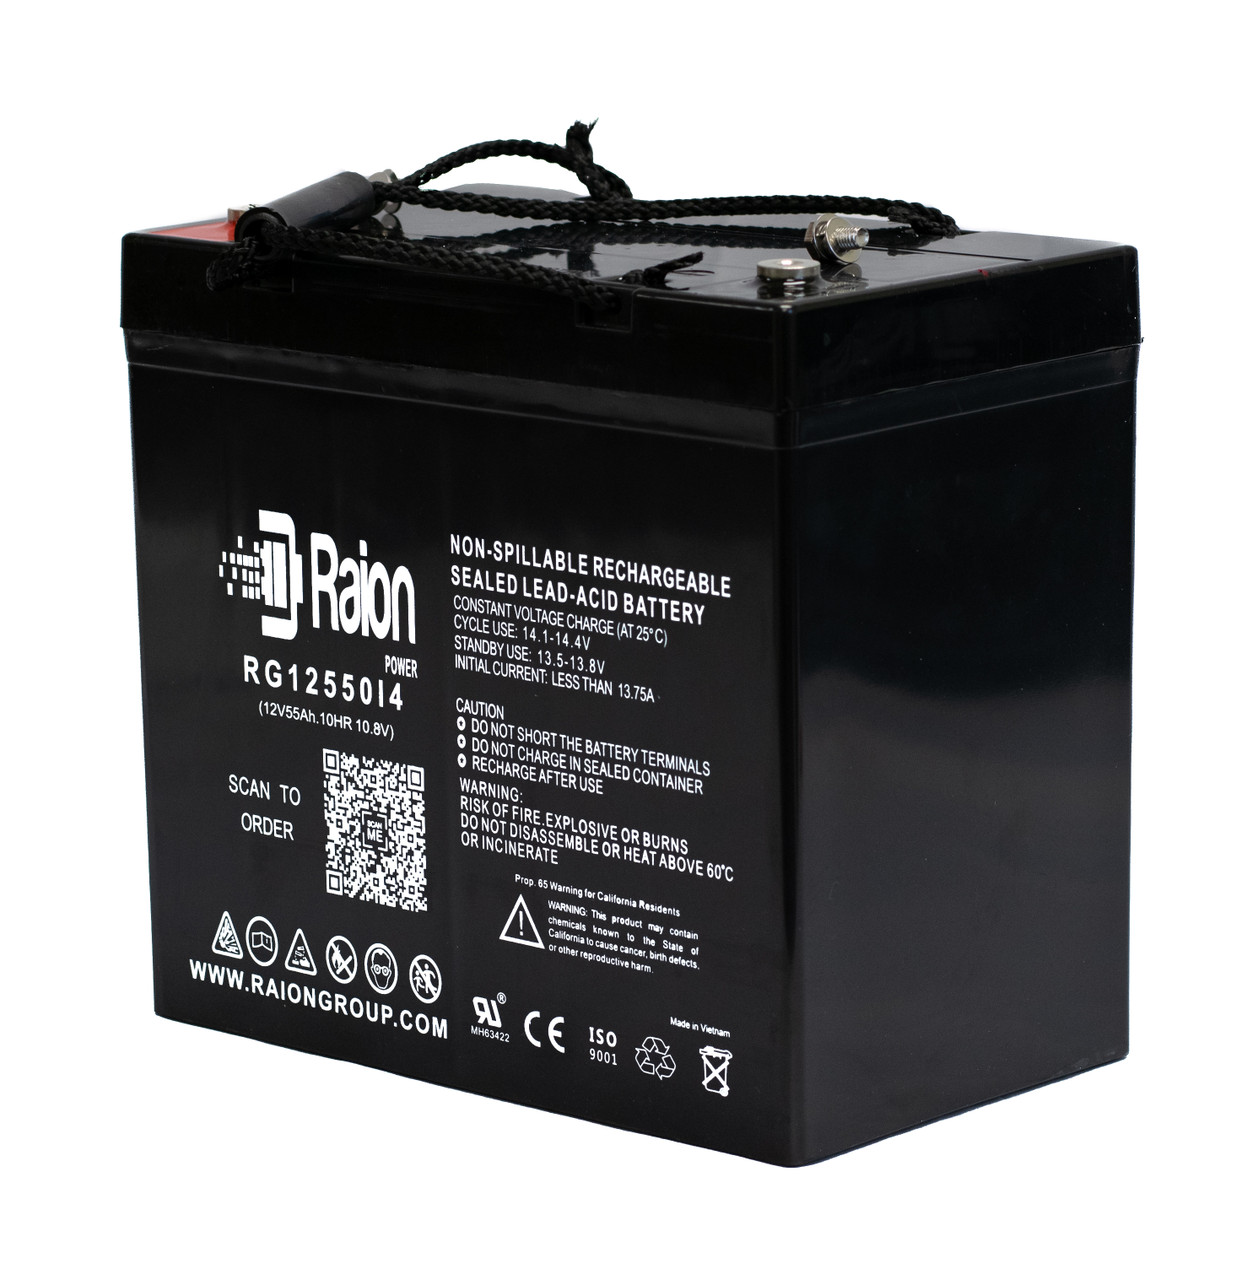 Raion Power 12V 55Ah 22NF Mobility Scooter Battery Replacement for Bruno PaceSaver Scout RF